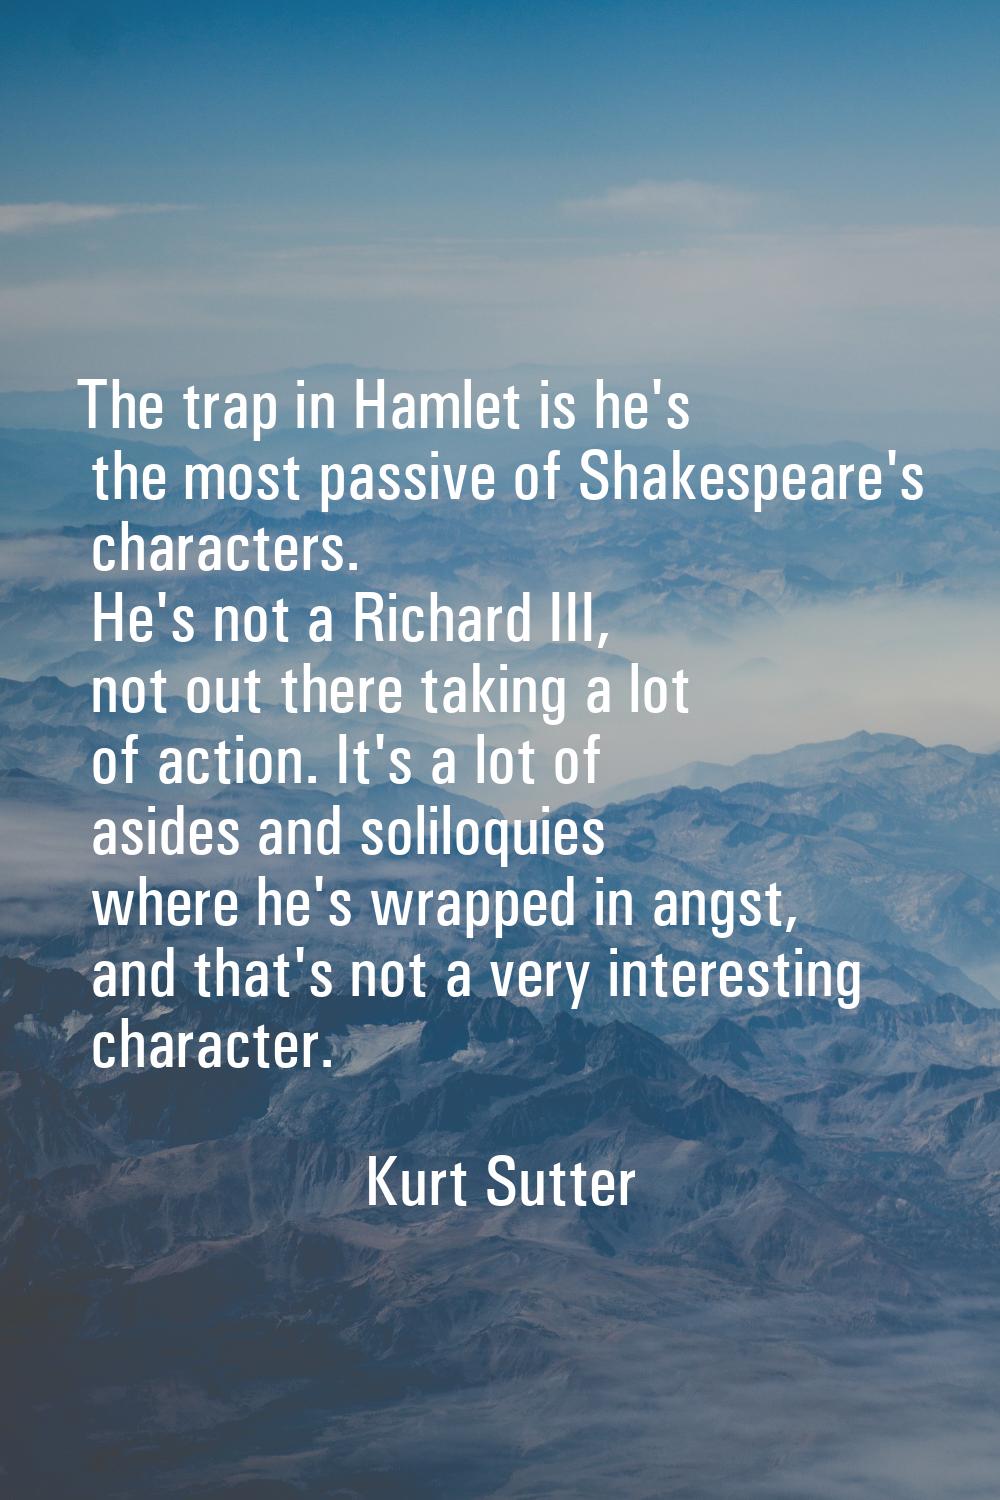 The trap in Hamlet is he's the most passive of Shakespeare's characters. He's not a Richard III, no